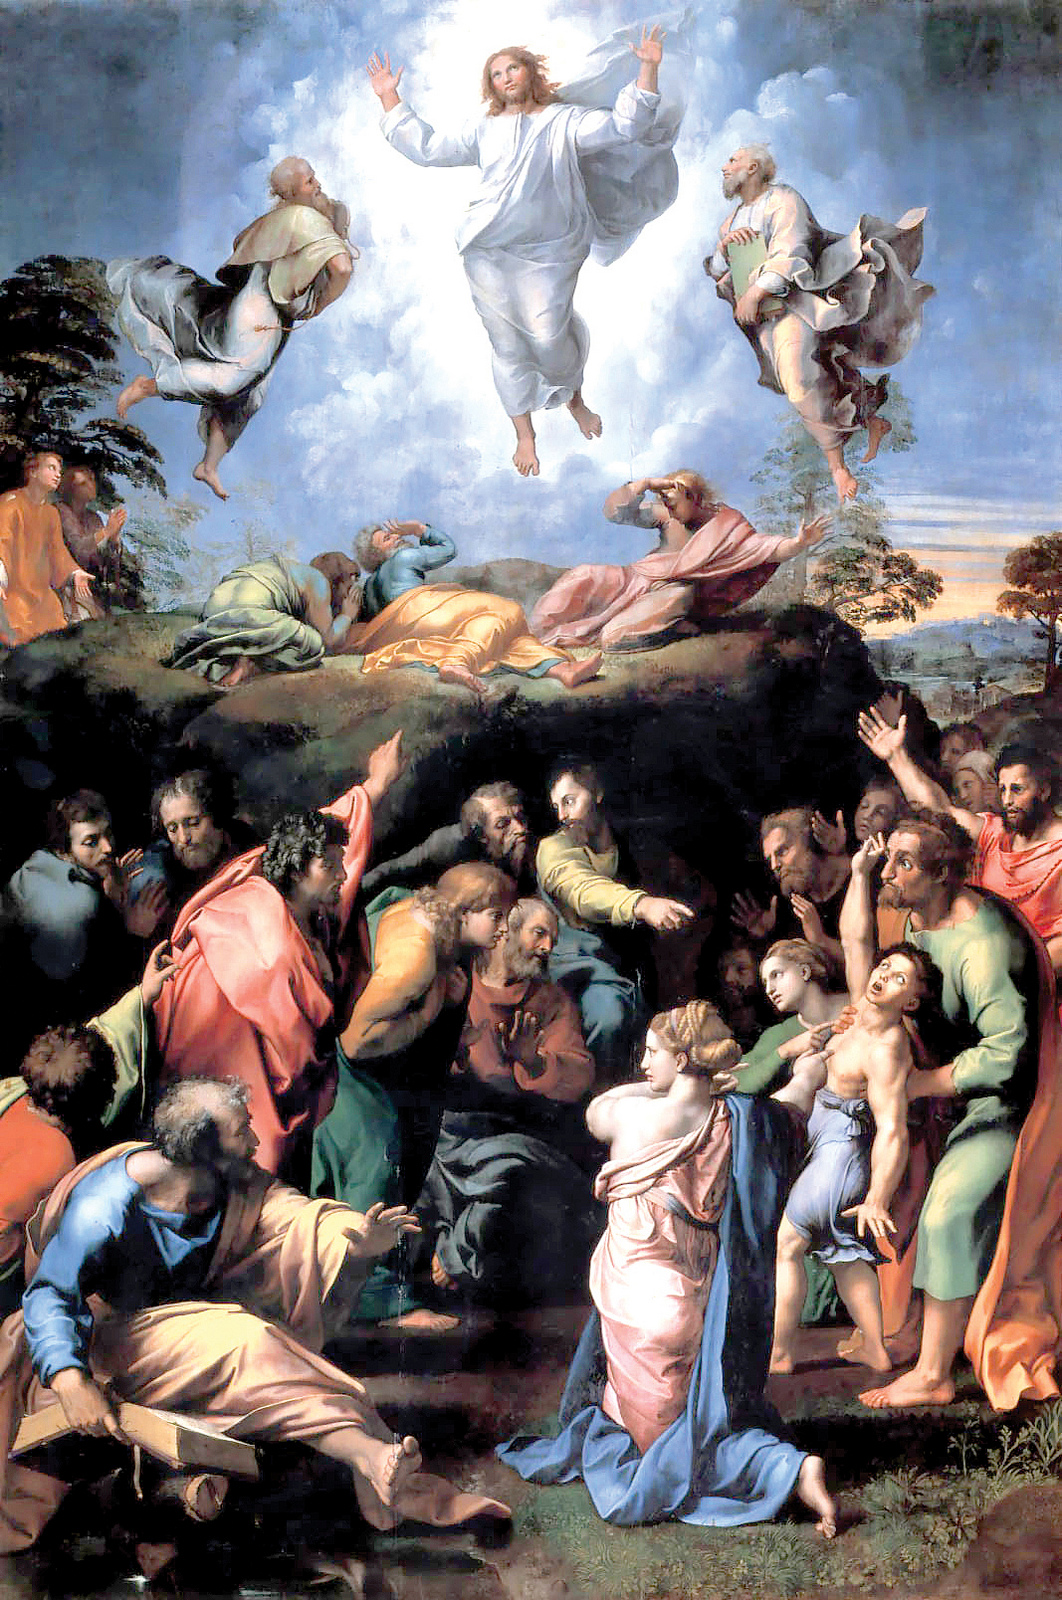 The Transfiguration, by Raphael.